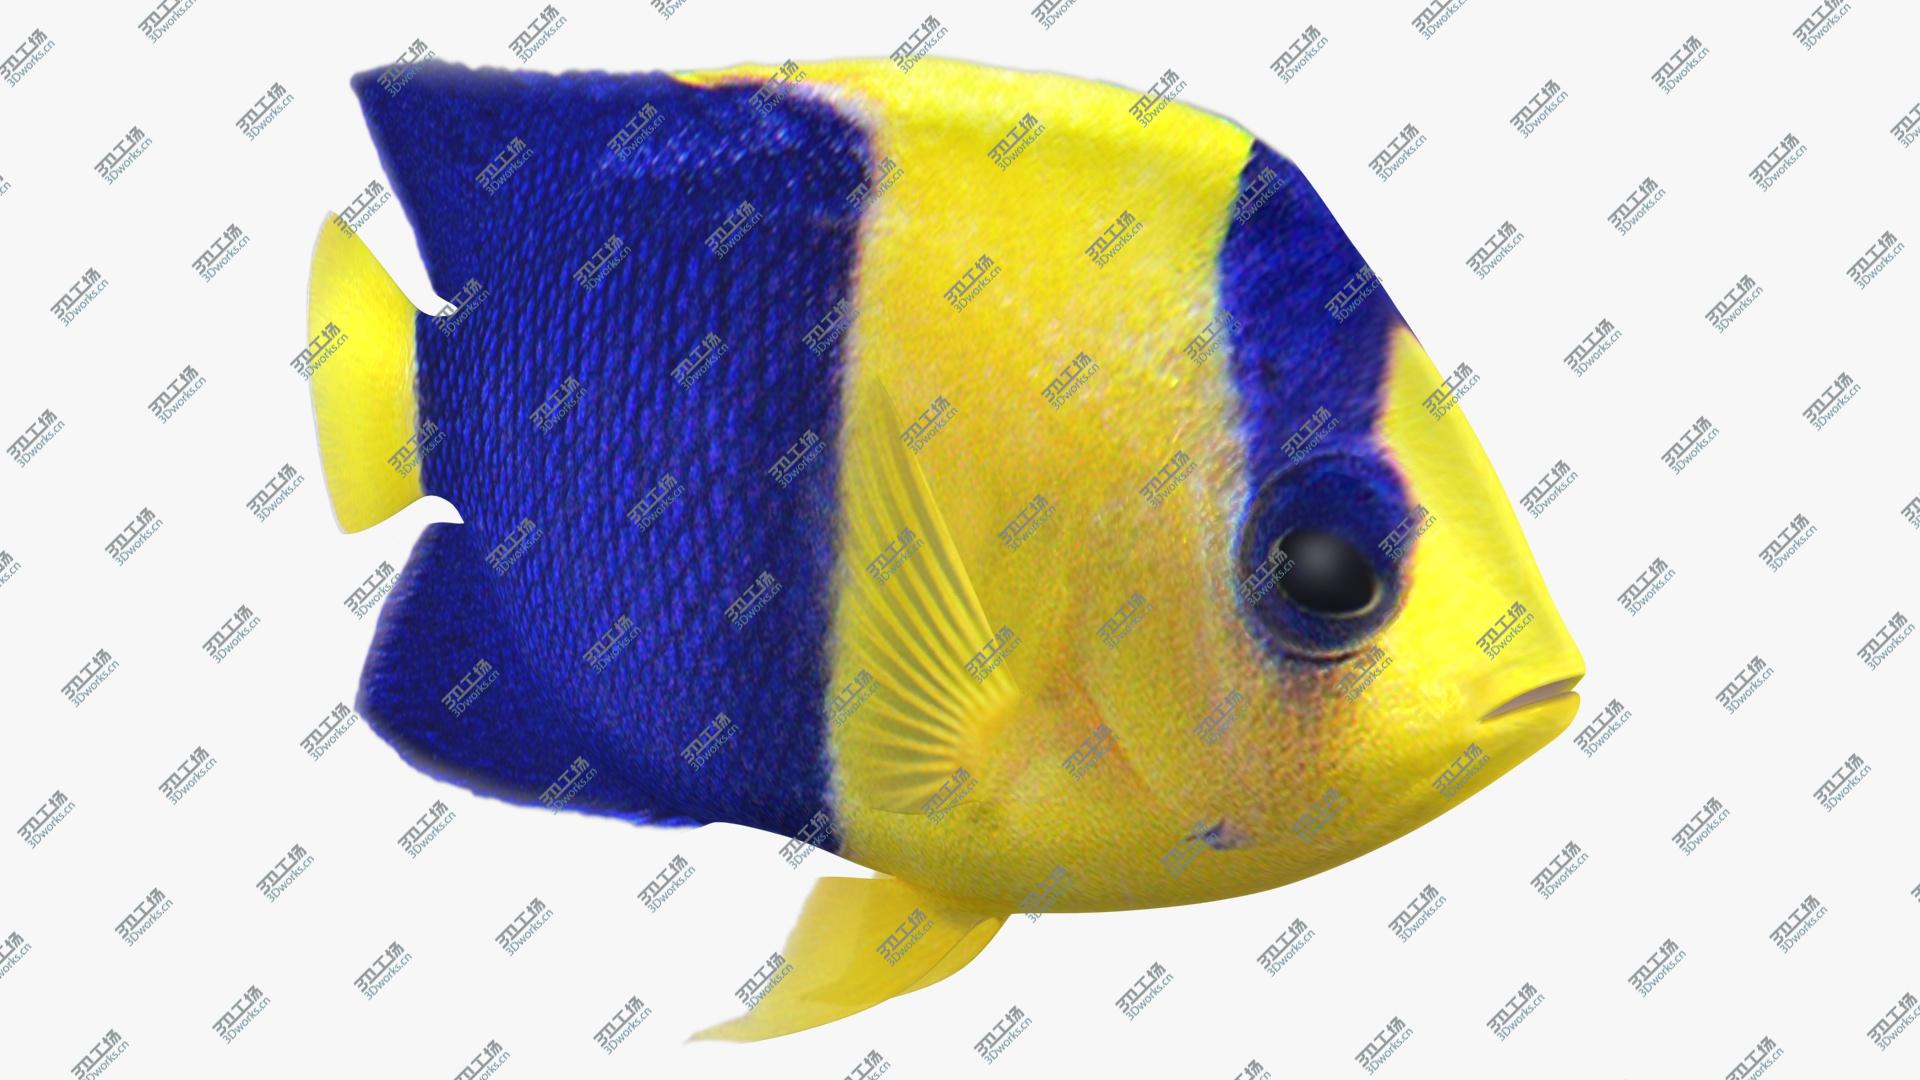 images/goods_img/202105071/3D Bicolor Angelfish Animated/1.jpg